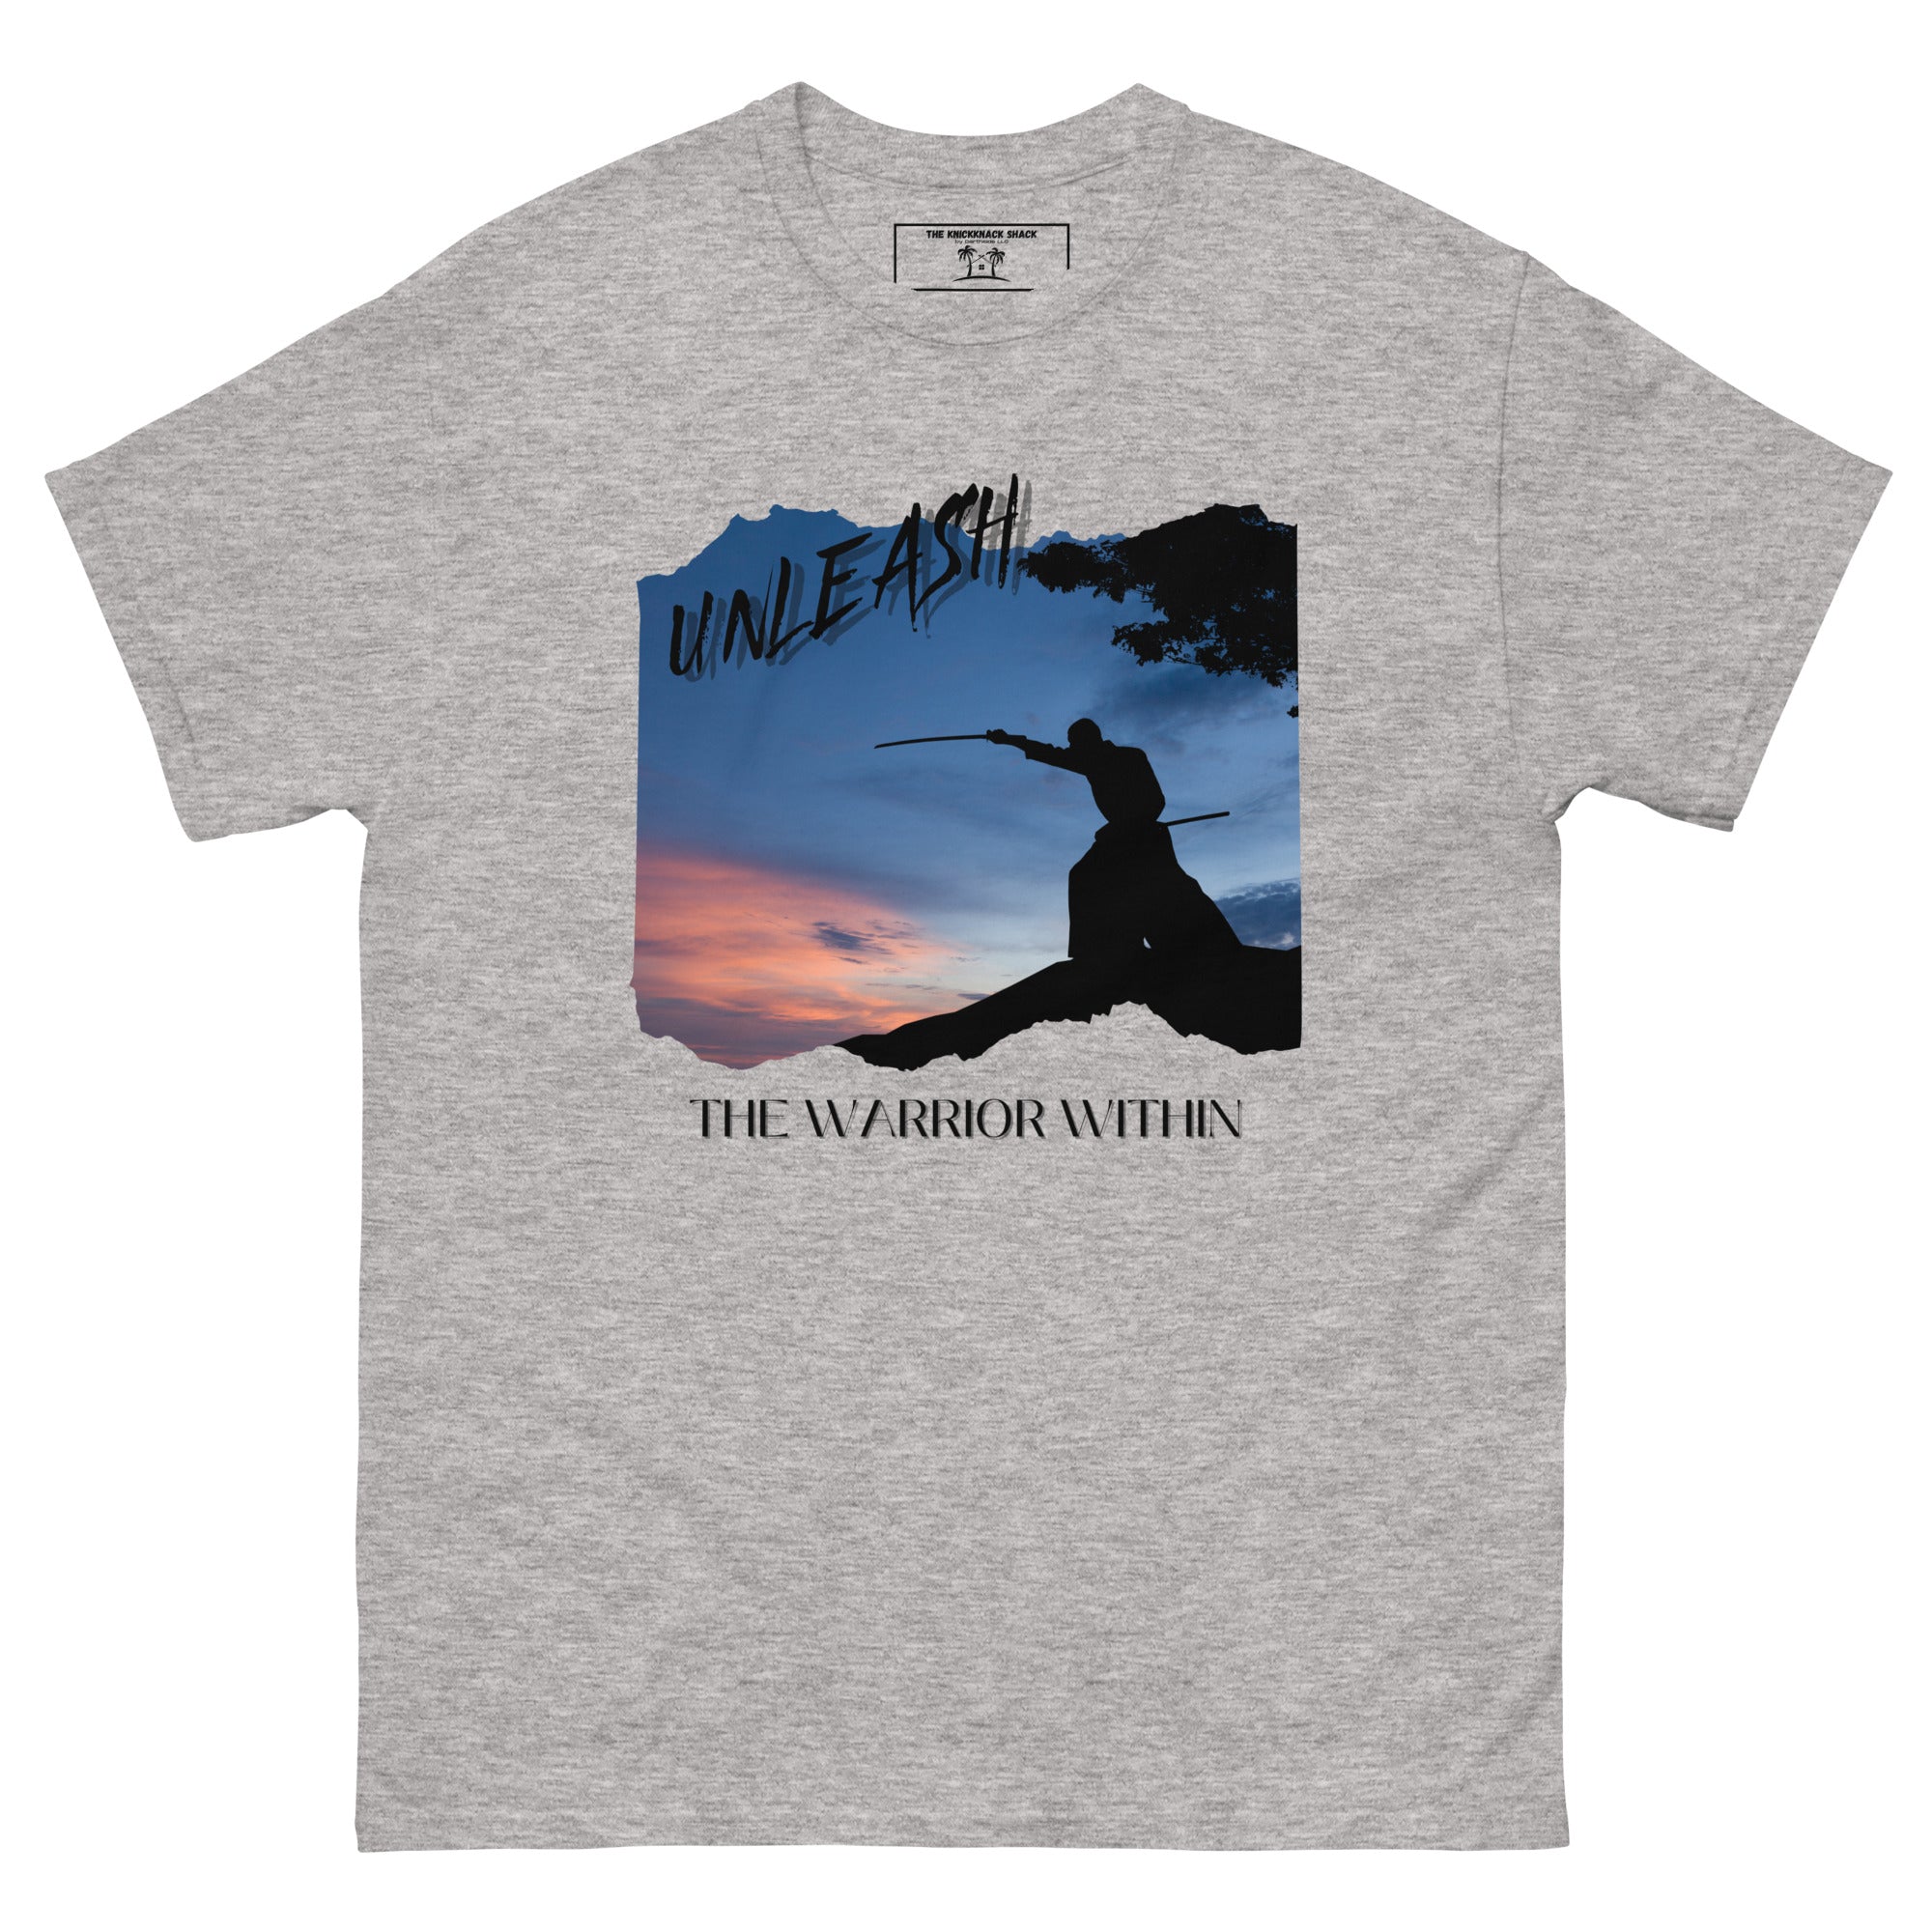 Tee-shirt classique - Warrior Within 2 (couleurs claires)